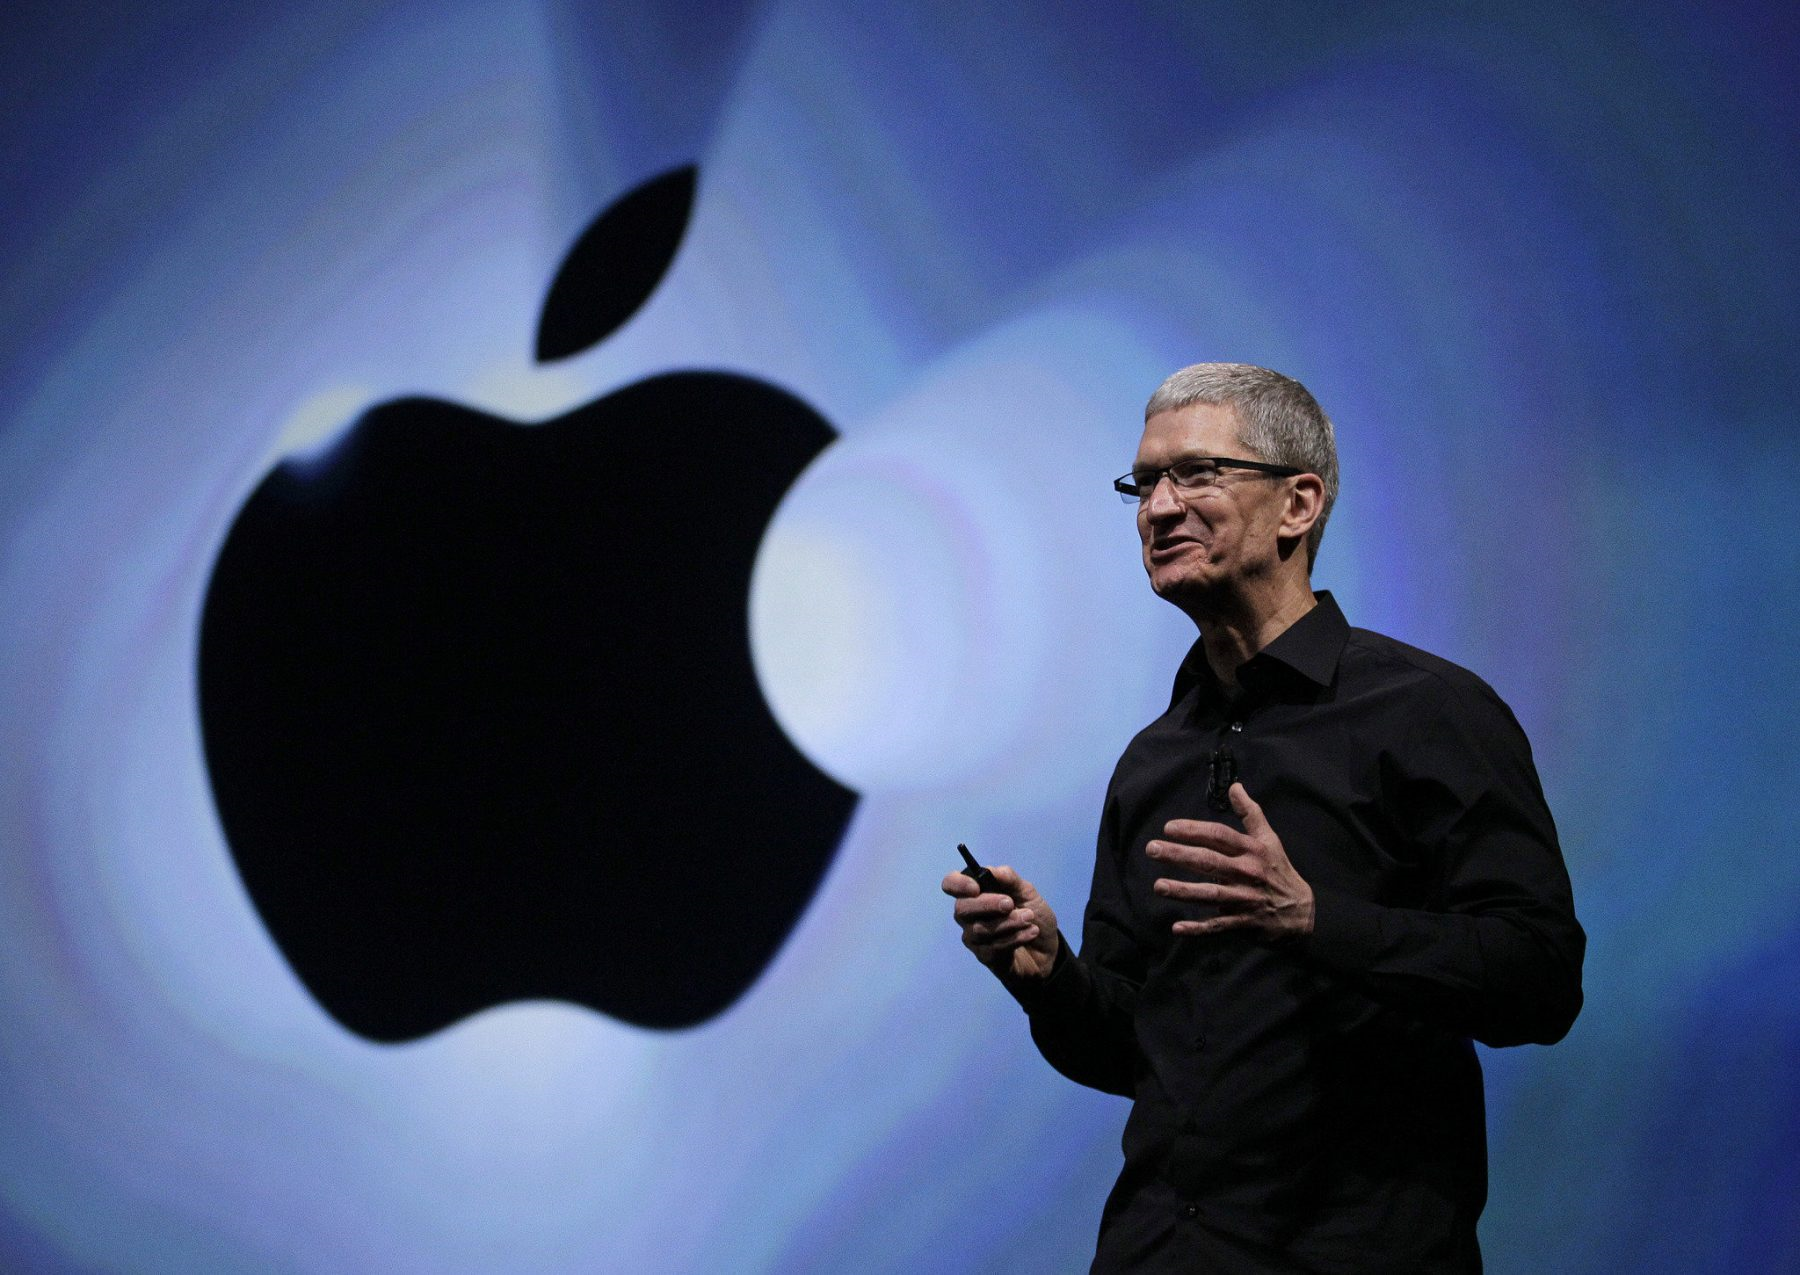 New-iPads-and-more-are-expected-as-Apple-announces-April-20-event